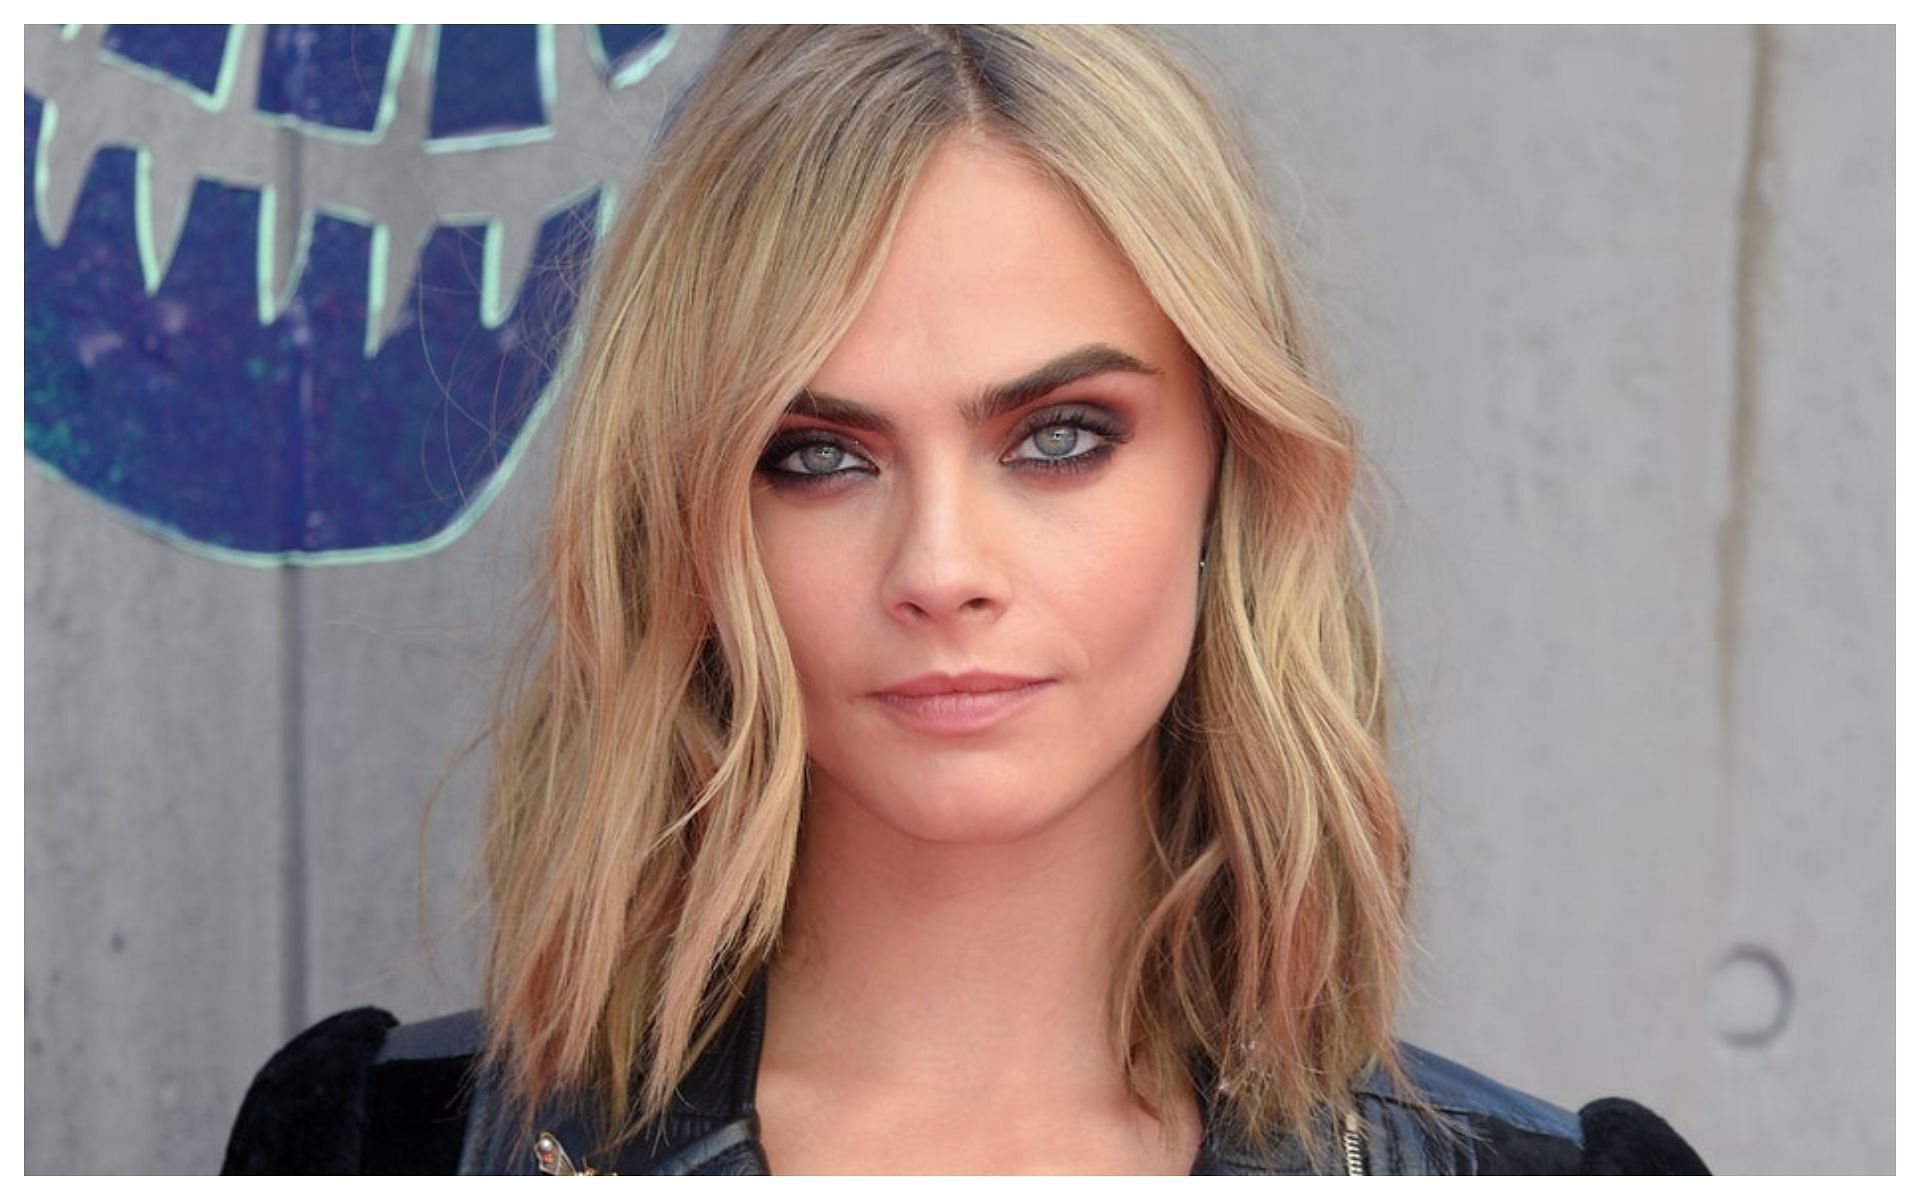 Model and actress Cara Delevingne has her own station (Image via Teen Vogue)